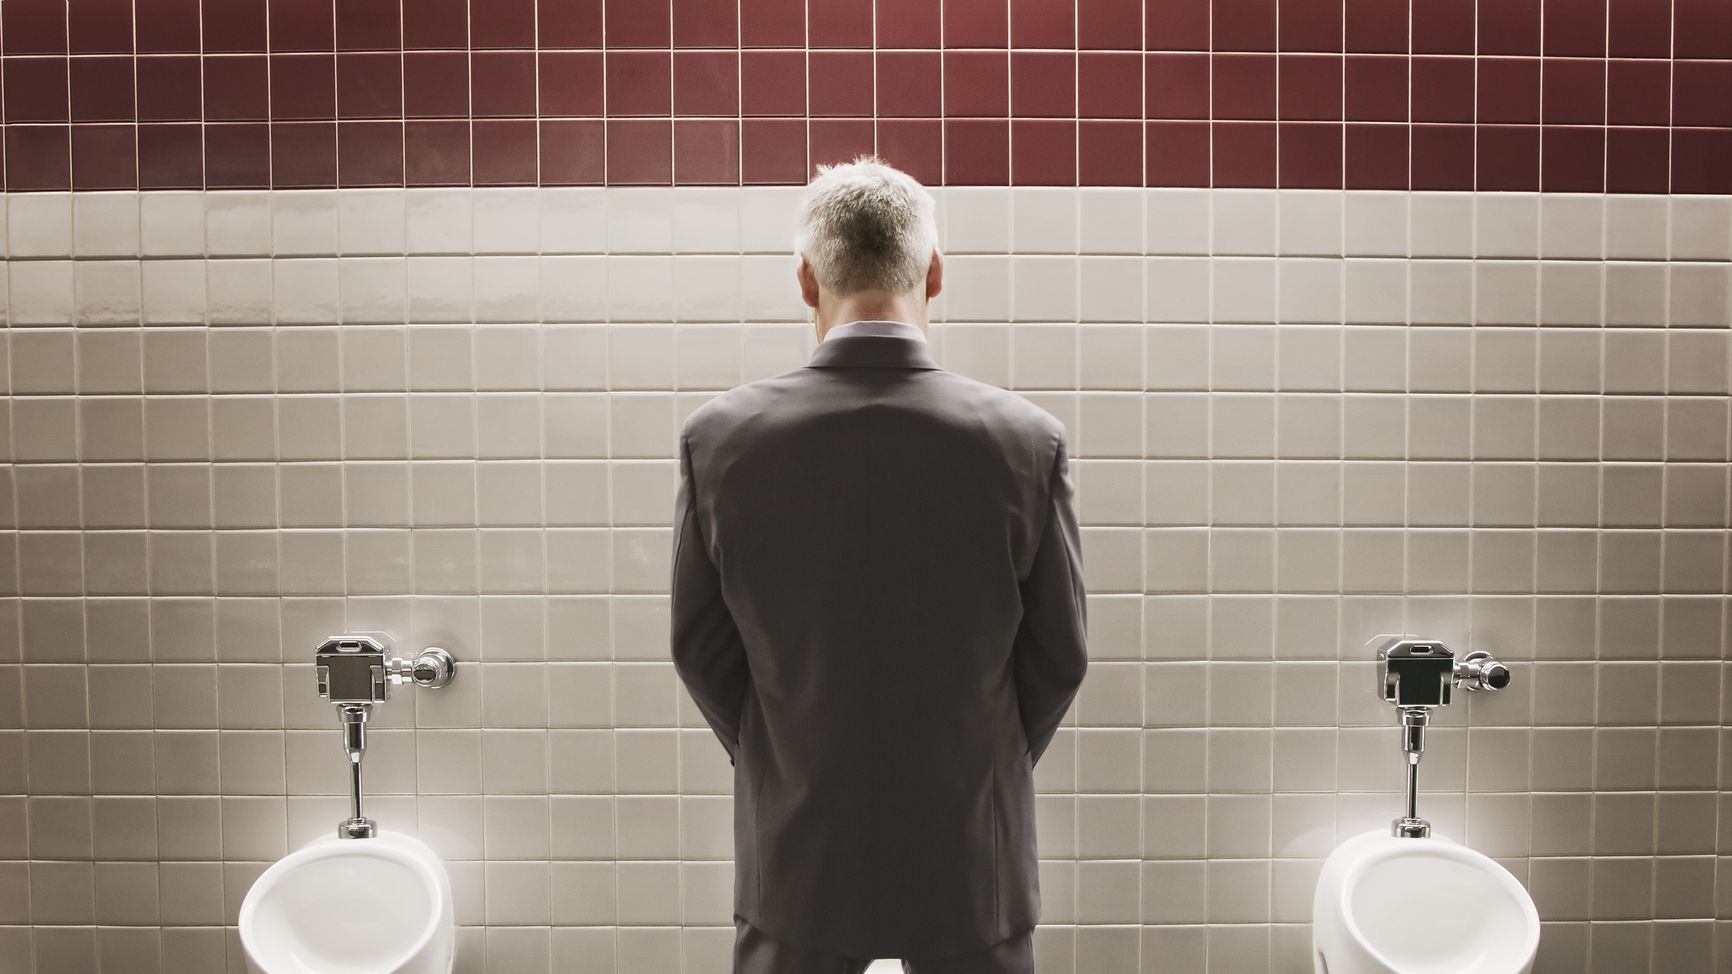 A Urologist Explains Why You Need to Pee When You're Nervous